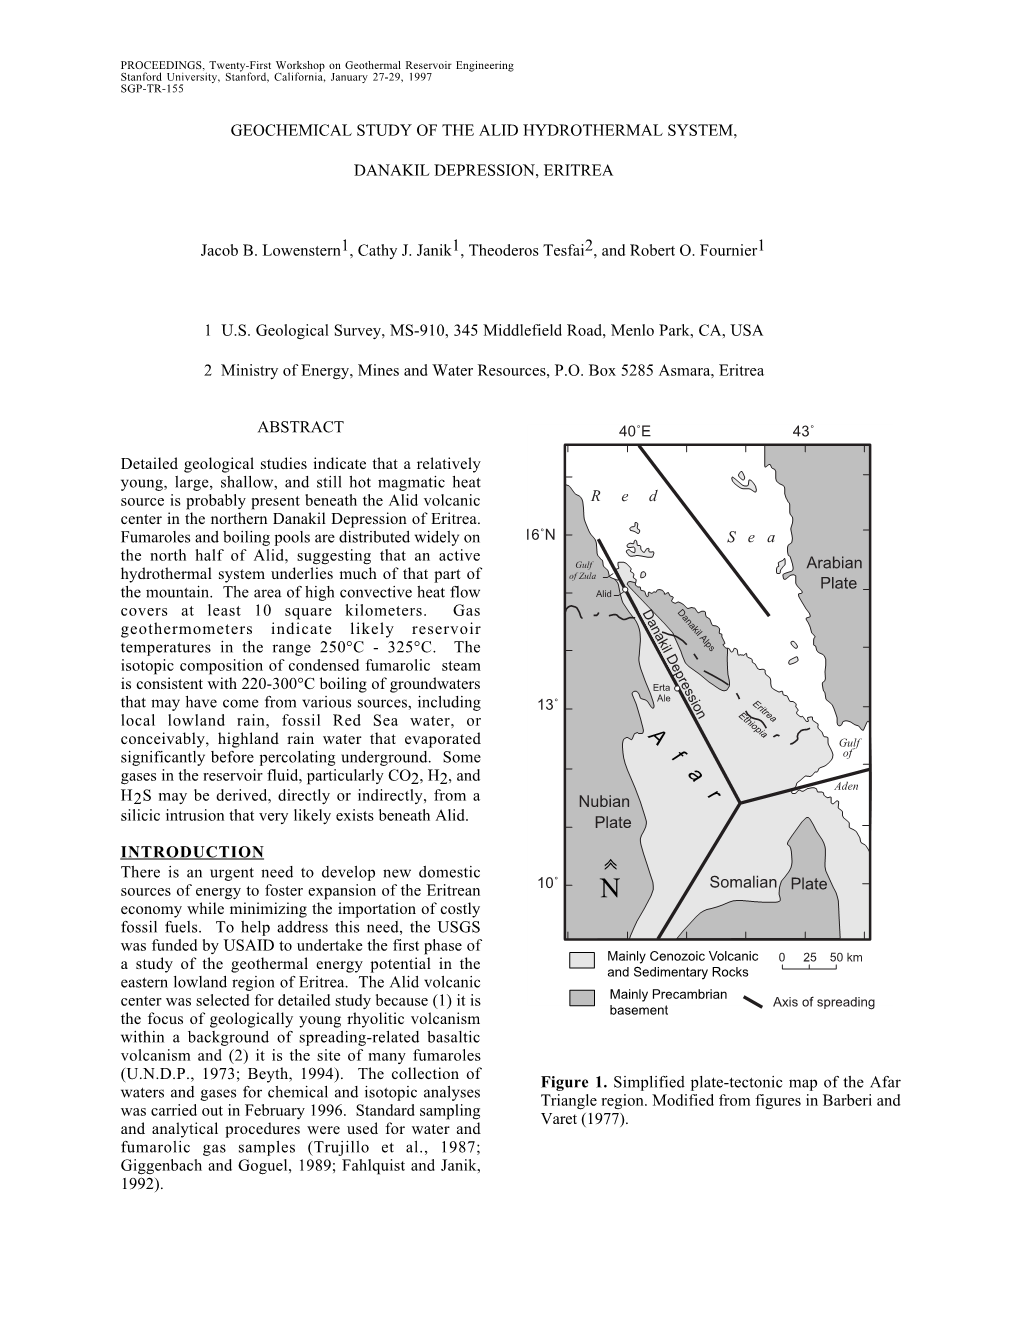 Geochemical Study of the Alid Hydrothermal System